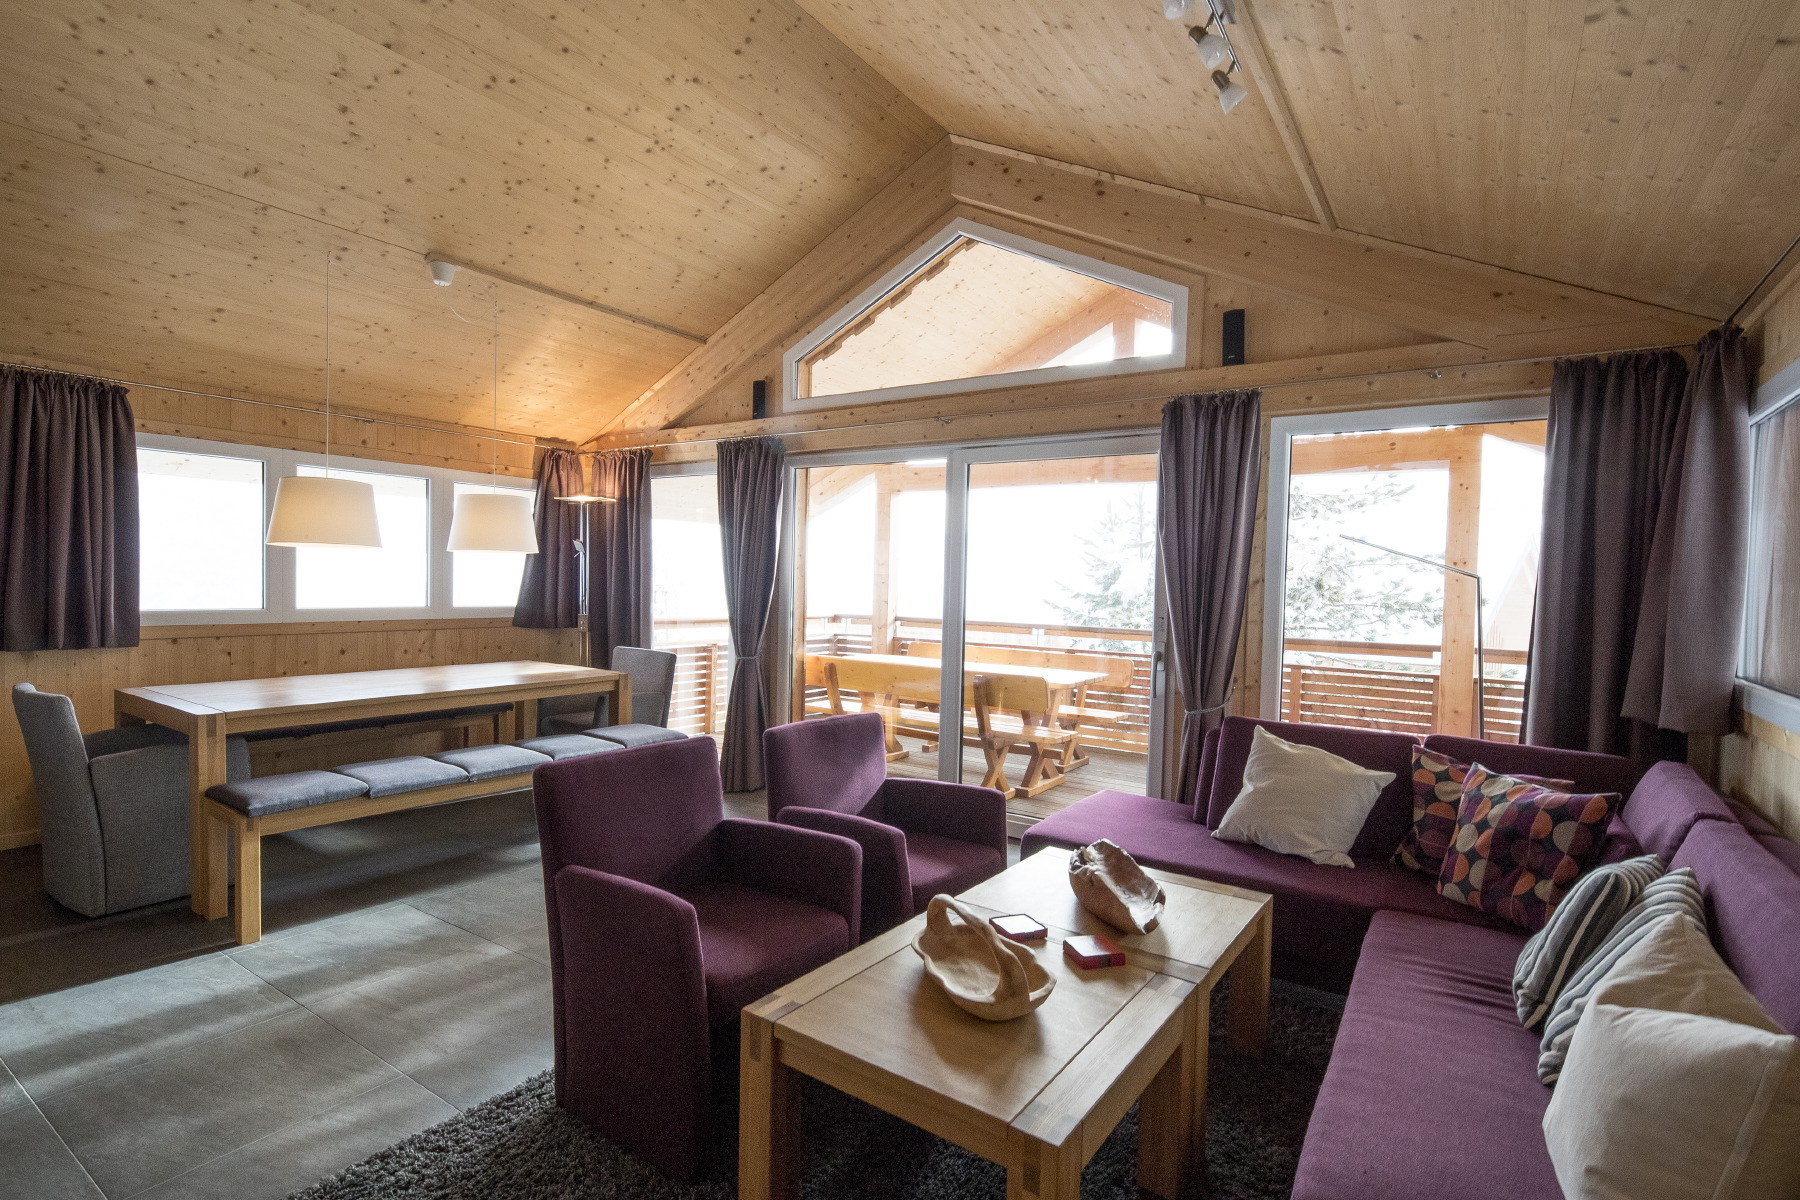  in Turrach - Chalet # 36 with sauna and indoor whirlpool